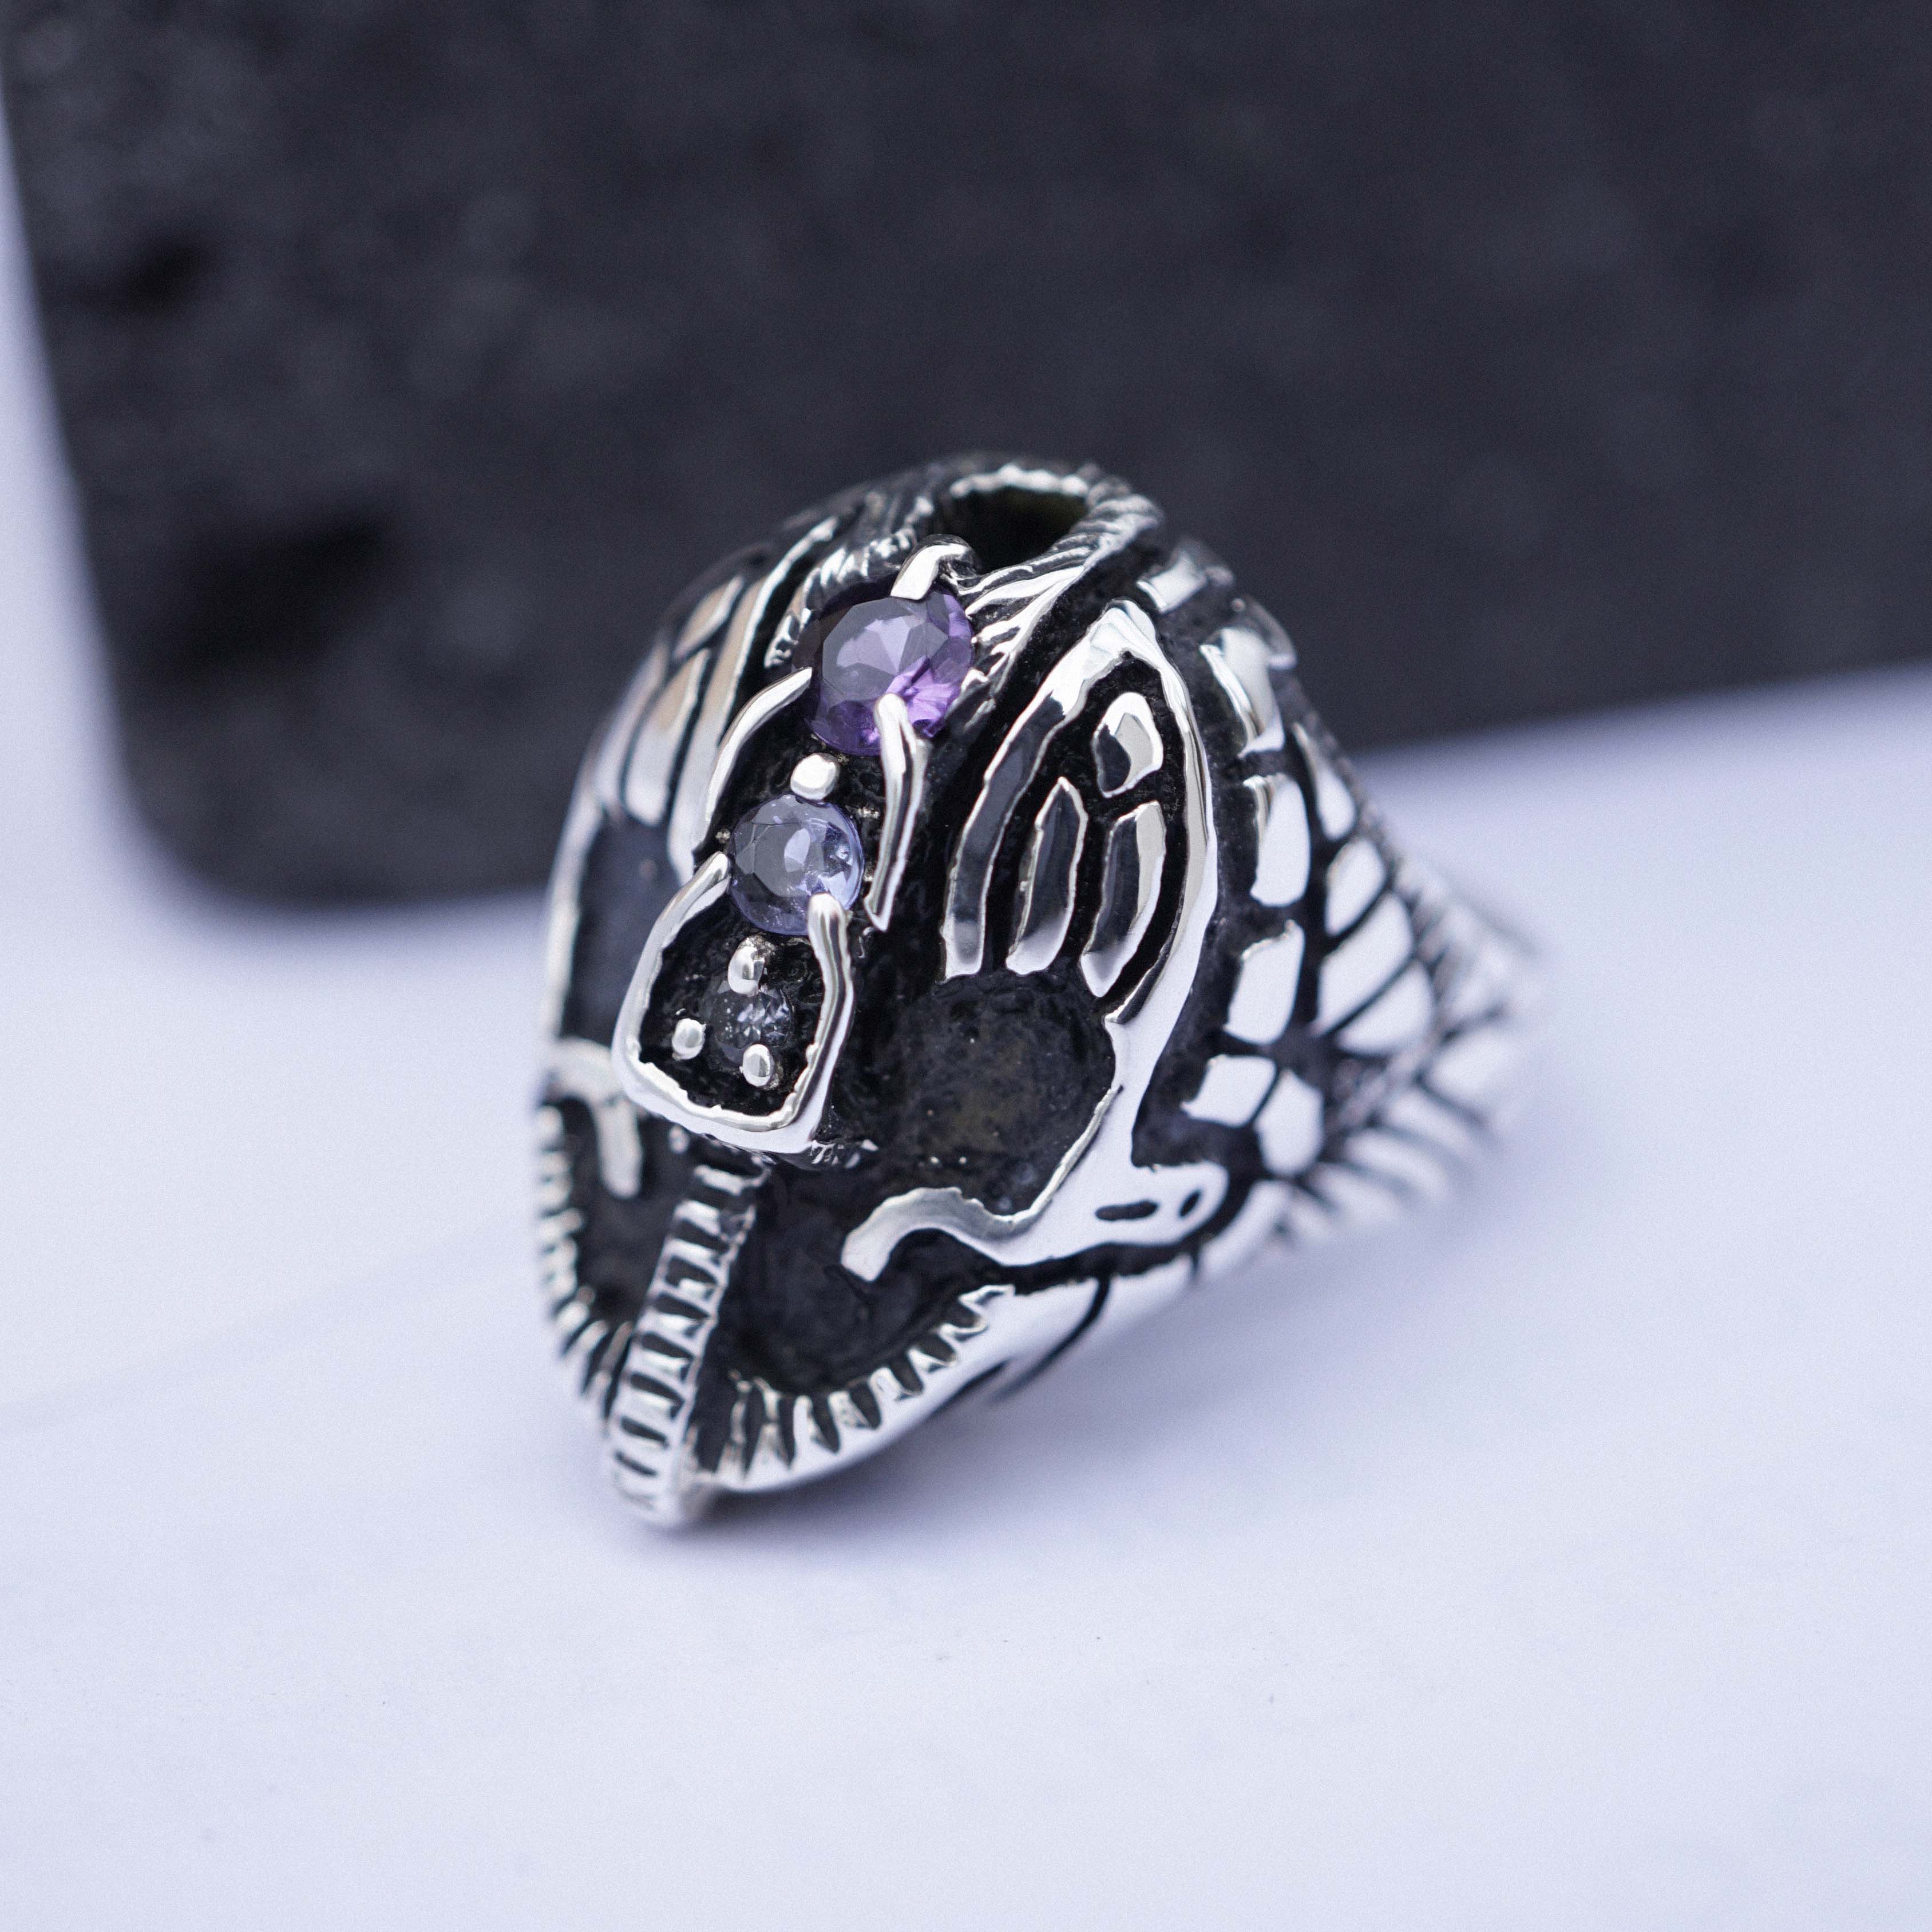 Statement face ring 